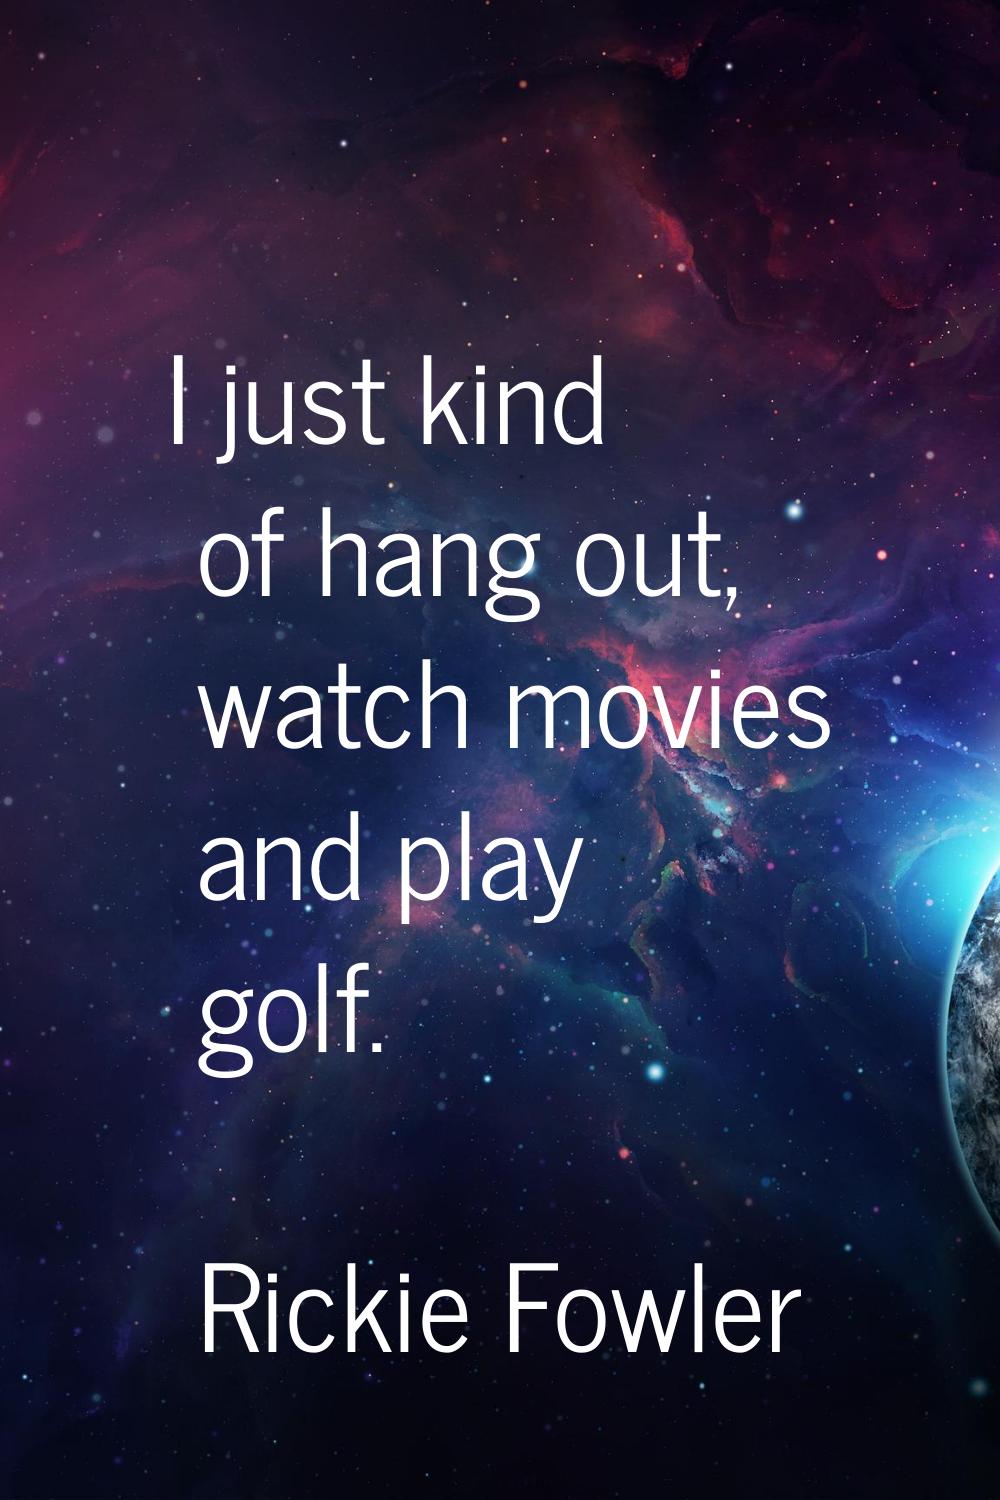 I just kind of hang out, watch movies and play golf.